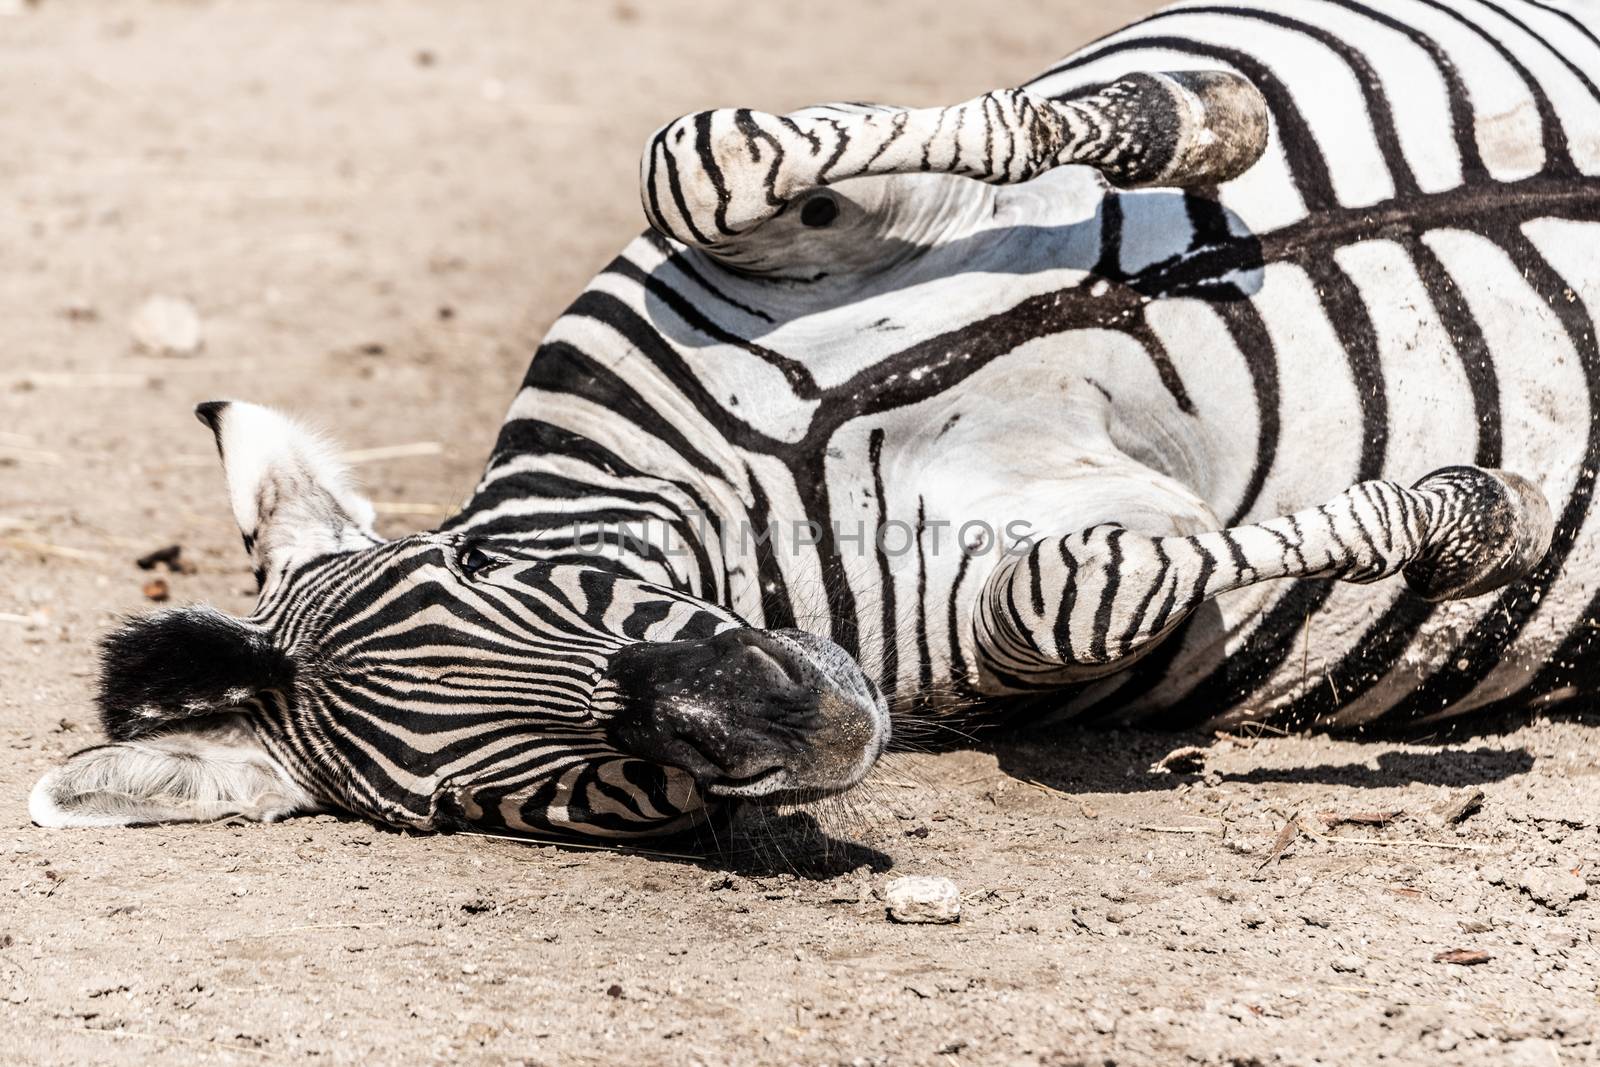 Zebra wallowing on the dusty ground. Funny animal. Africa.